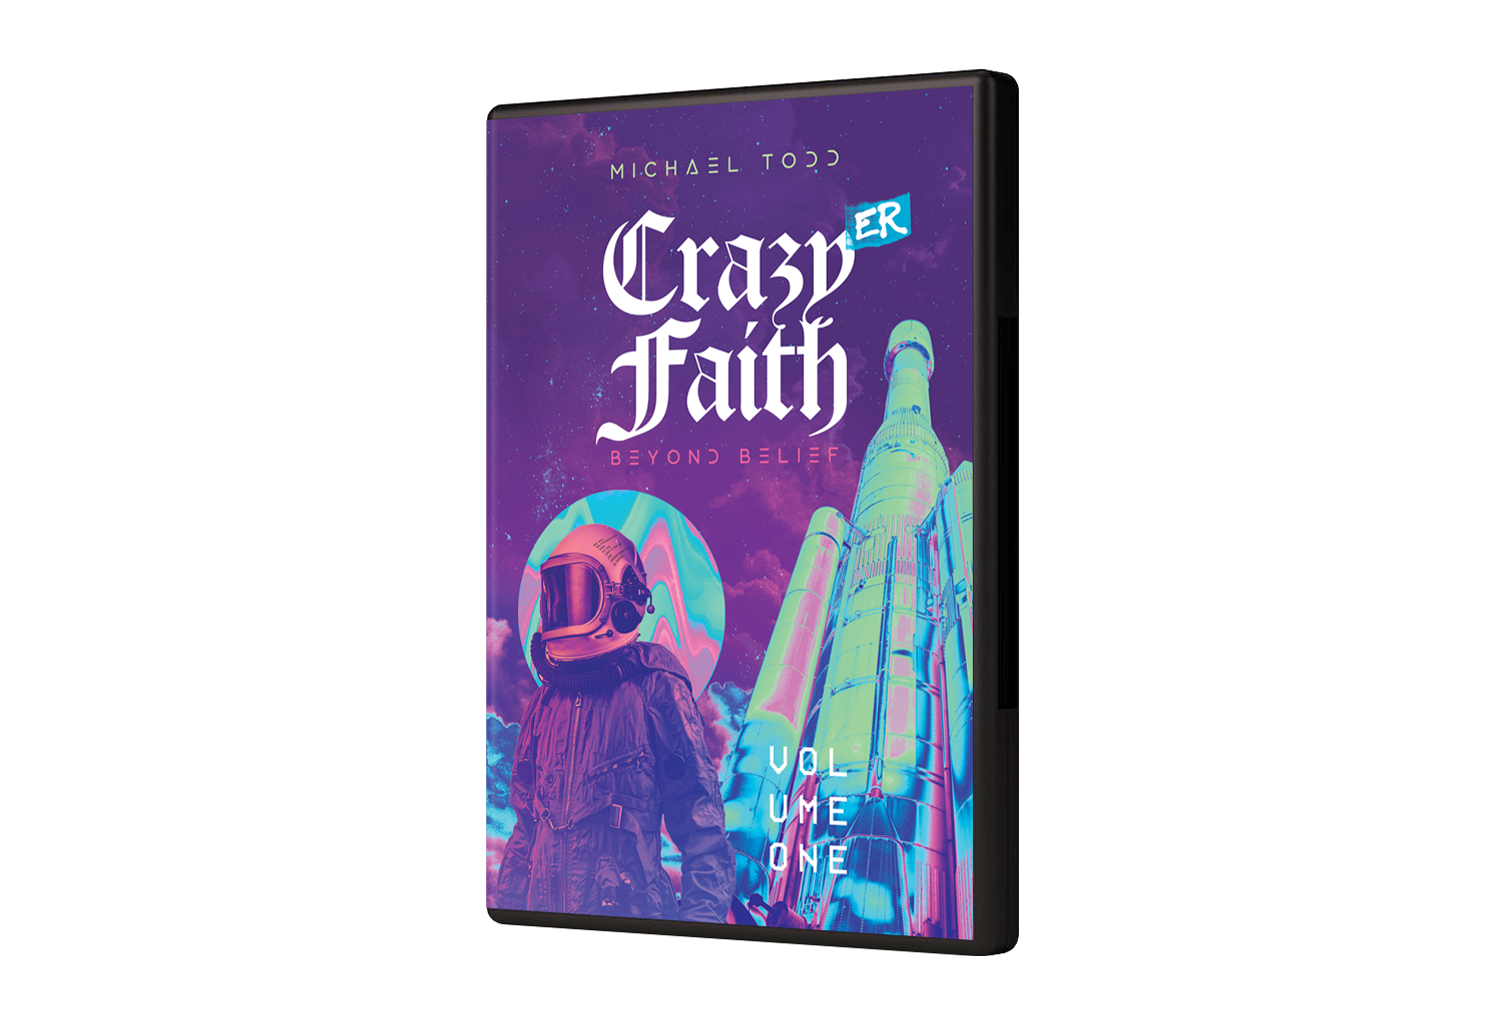 Pastor Mike Todd’s three-CD teaching series, Crazier Faith: Volume One on TBN